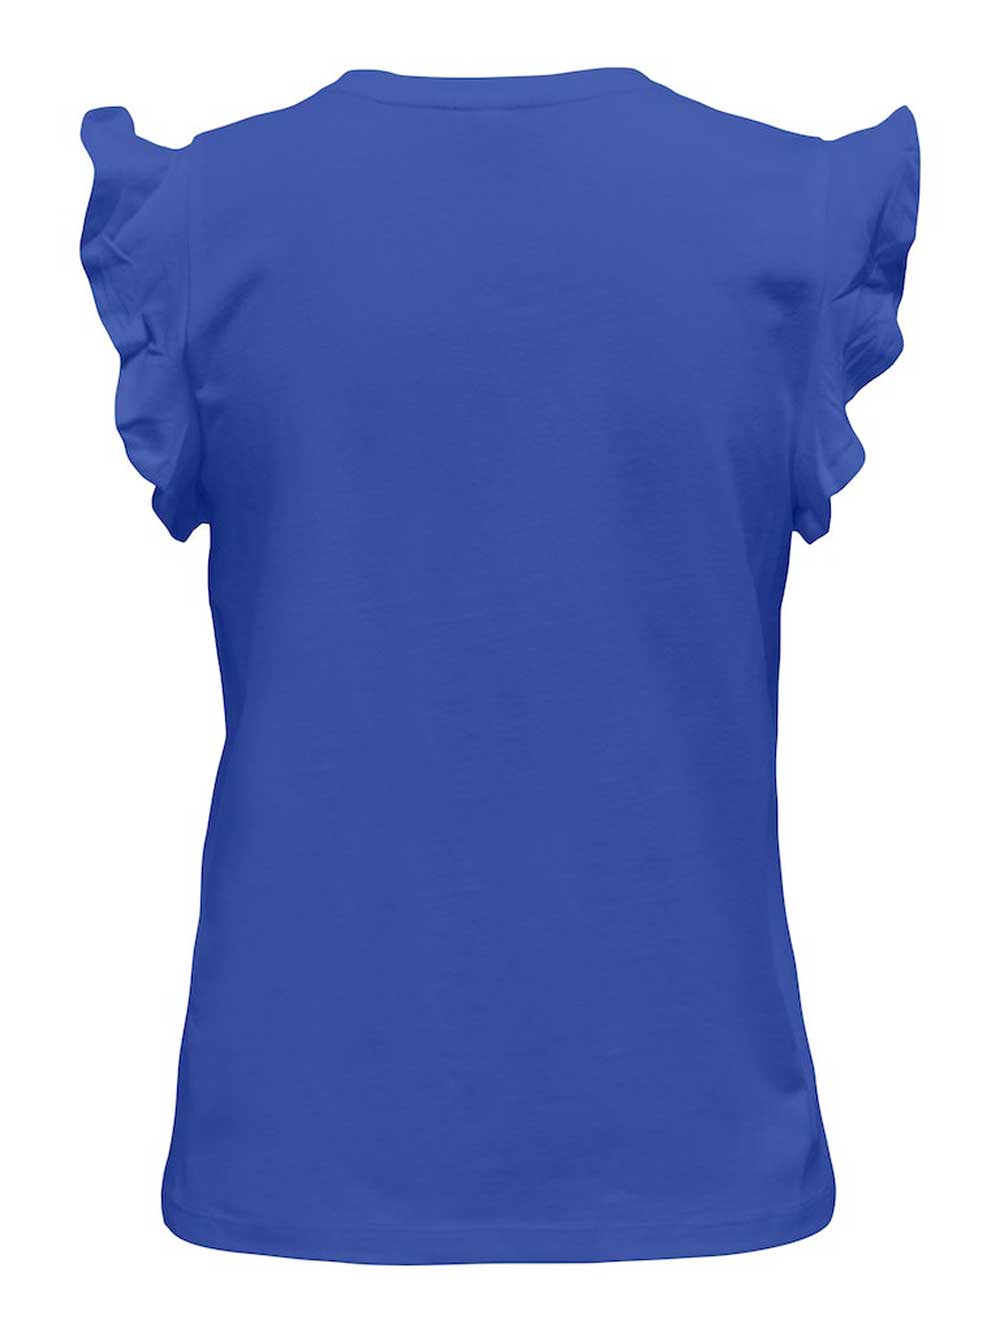 ONLY T-shirts e Tops ONLY da DONNA - Dazzling Blue Mira